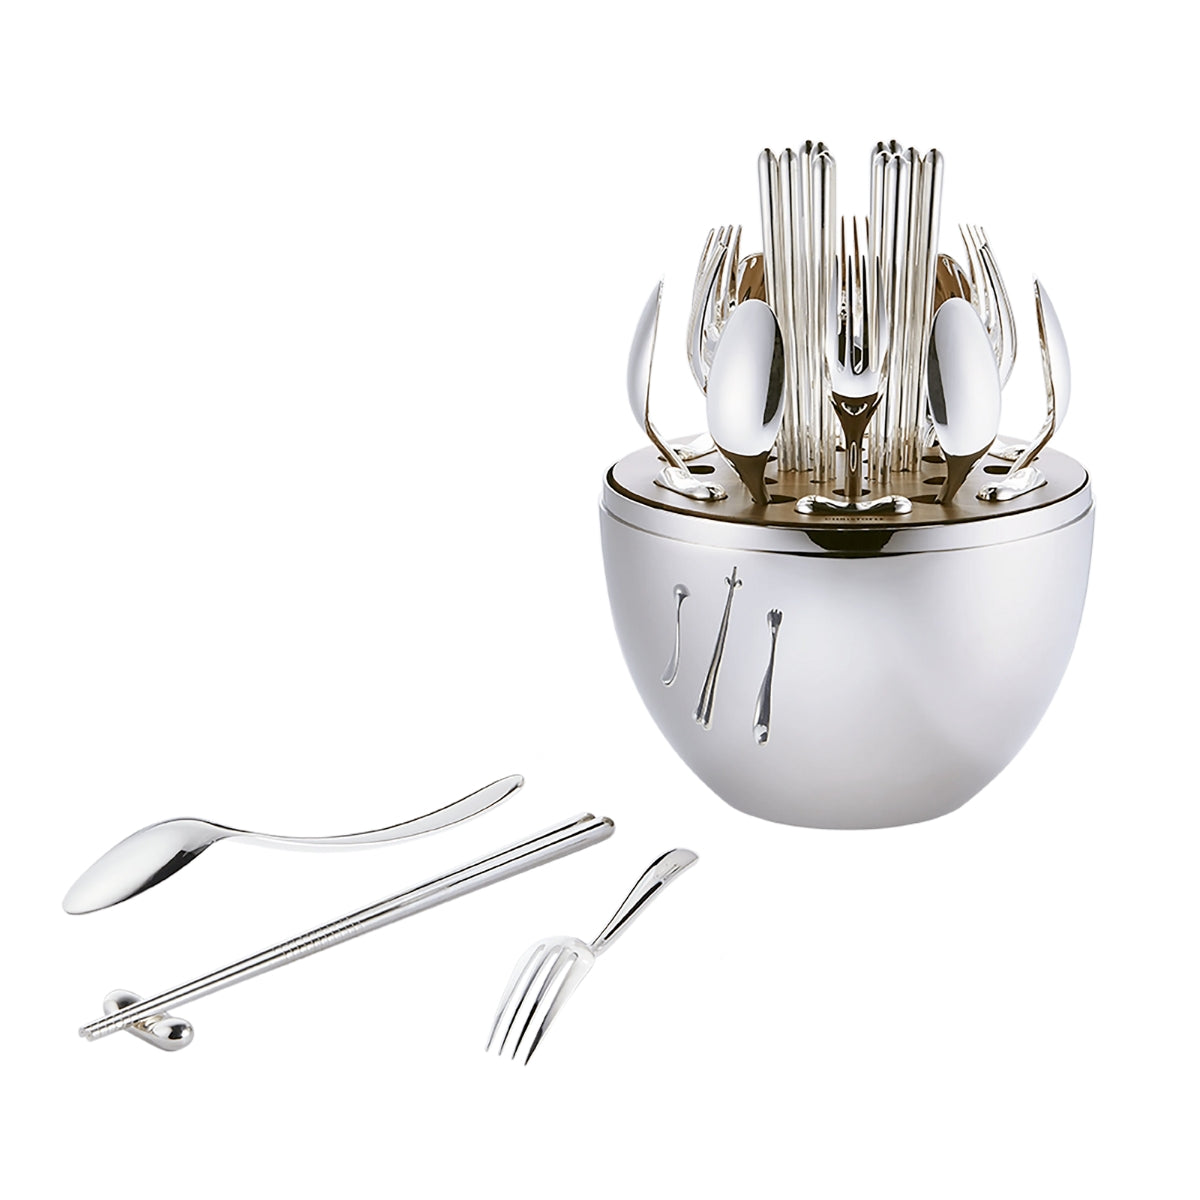 Flatware Set for 6 People (24 Pieces) Mood Asia Silver